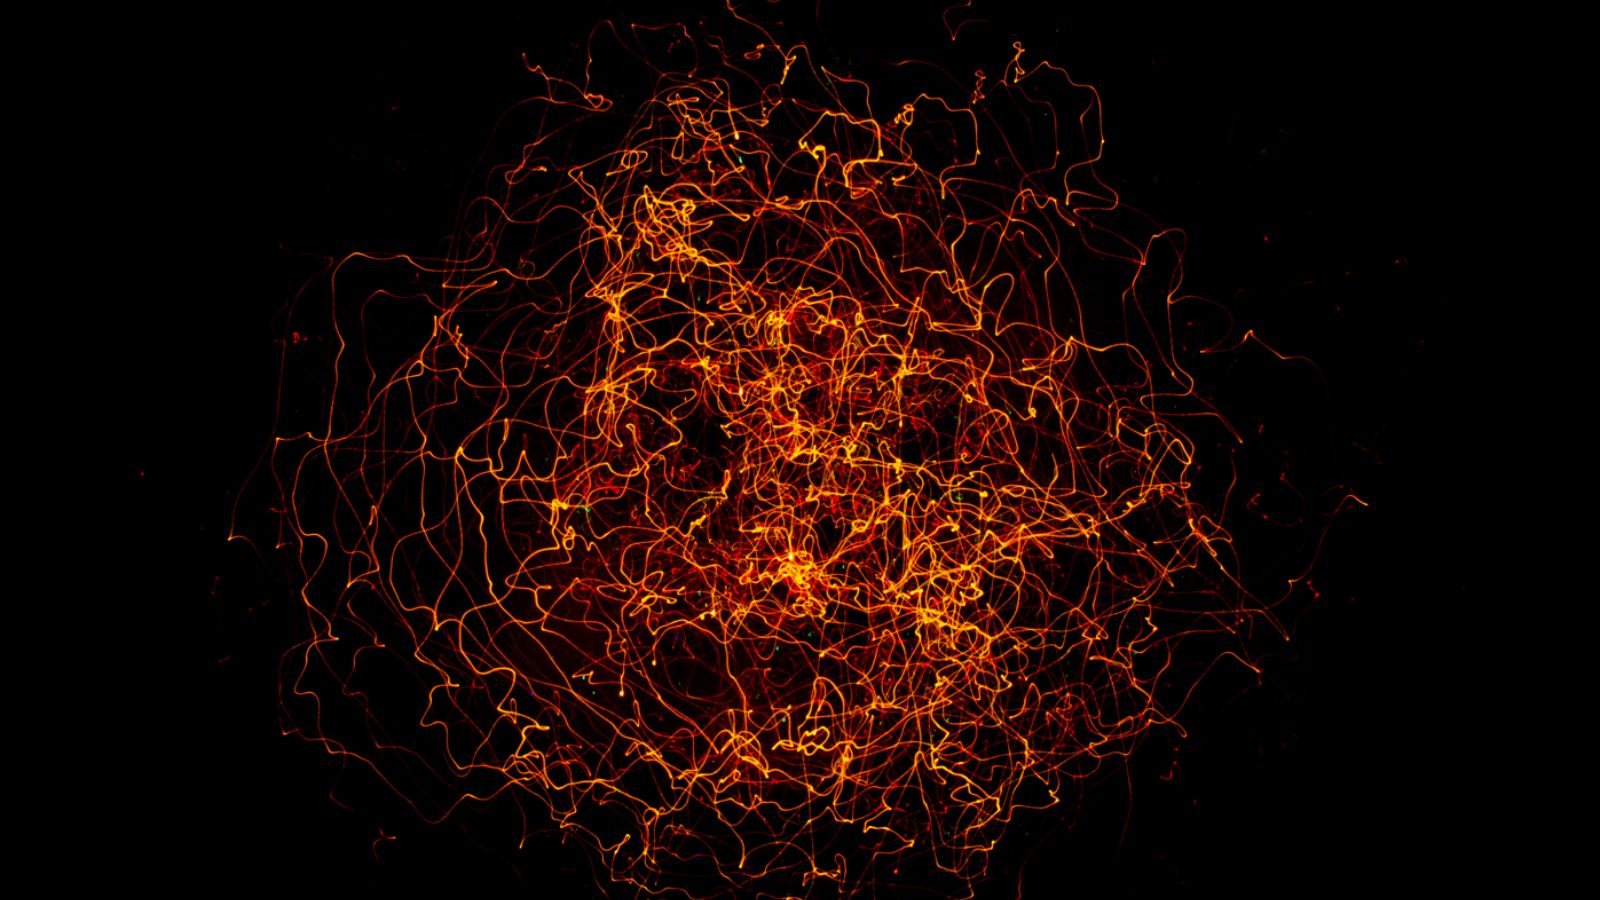 <p><span>Quantum entanglement, where particles become interconnected regardless of the distance separating them, is still a baffling phenomenon in quantum physics (</span><a href="https://physicsworld.com/a/quantum-entanglement-observed-in-top-quarks/"><span>Physics World</span></a><span>). Scientists have tried and failed to explain how particles can be so affected by others even after they are physically separated.</span></p>